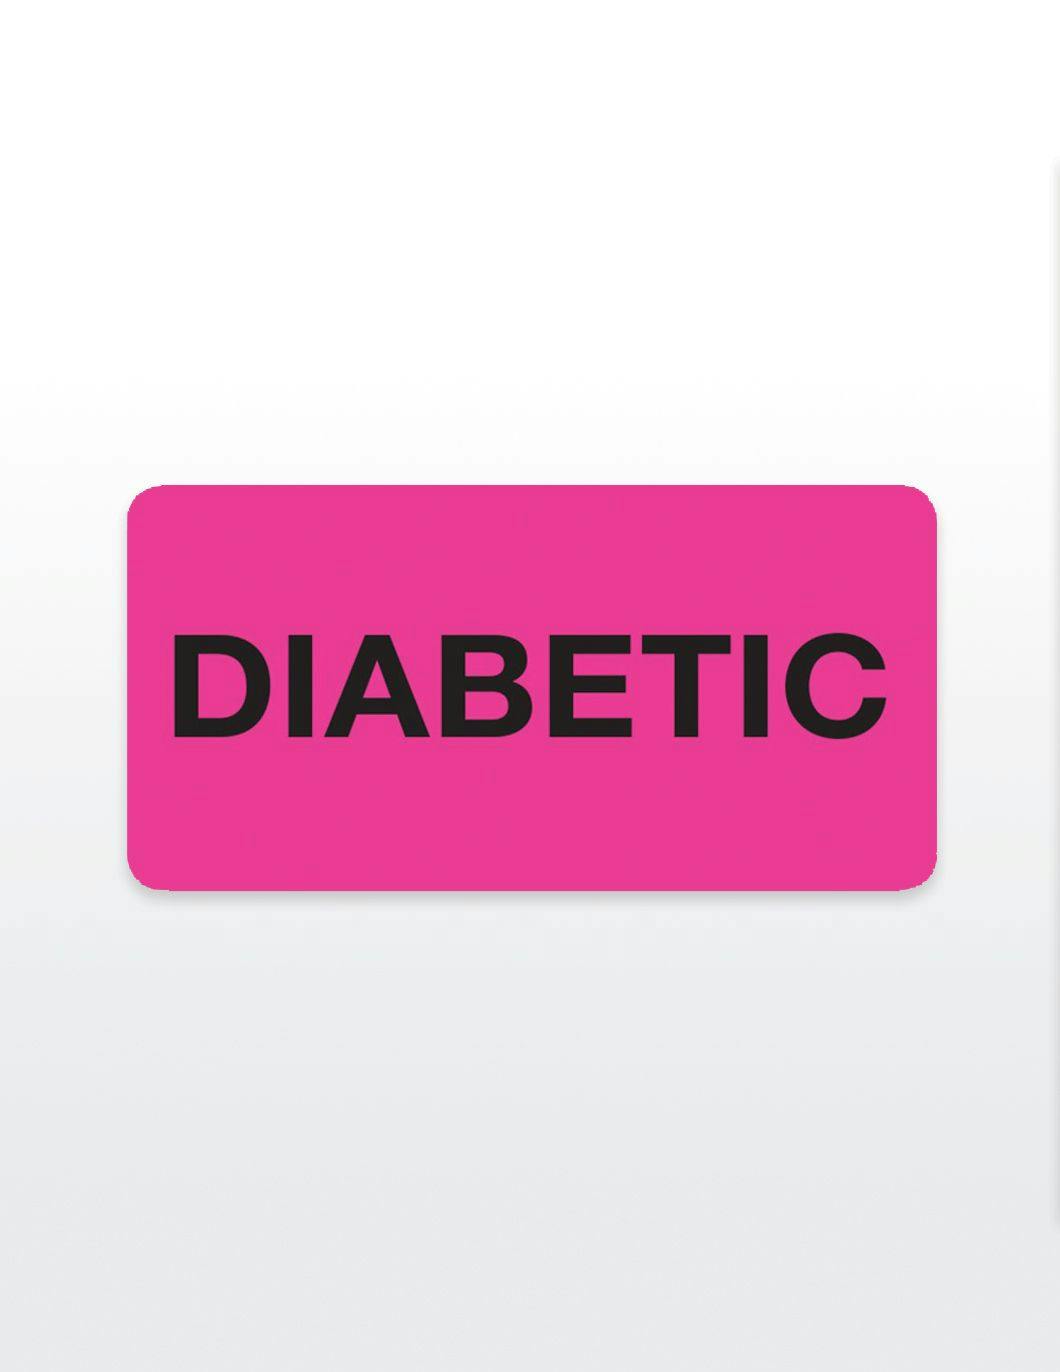 diabetic-medical-record-stickers